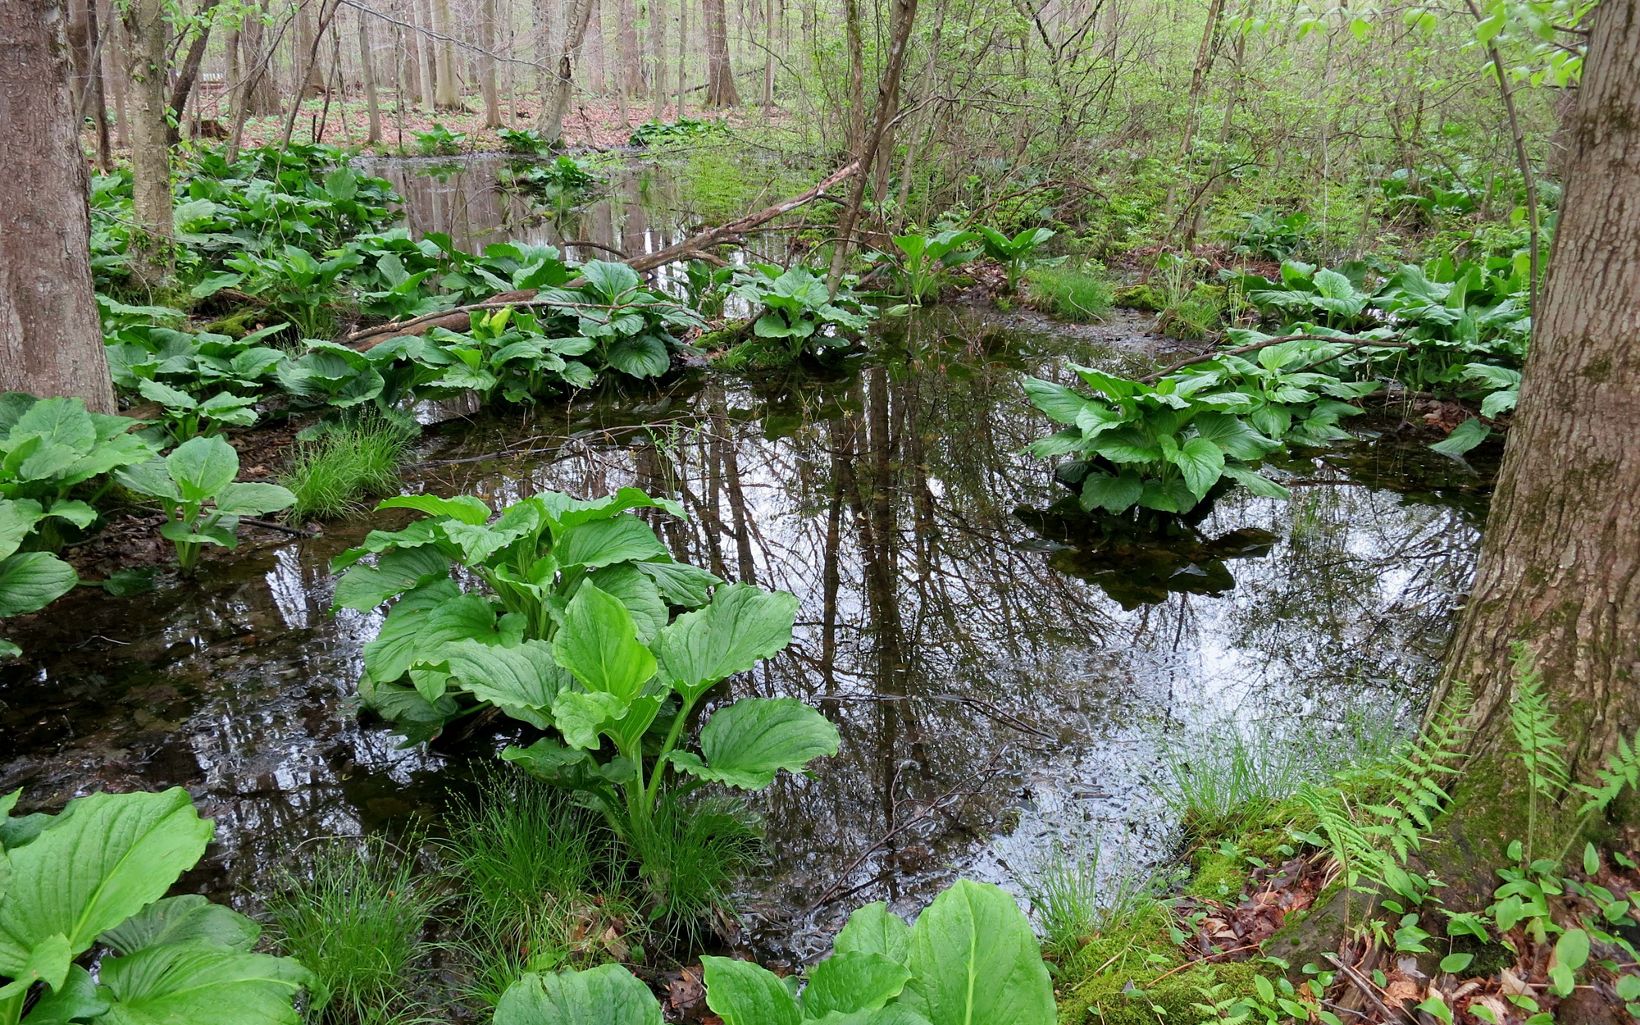 Green skunk cabbage peeking out of a vernal pool.